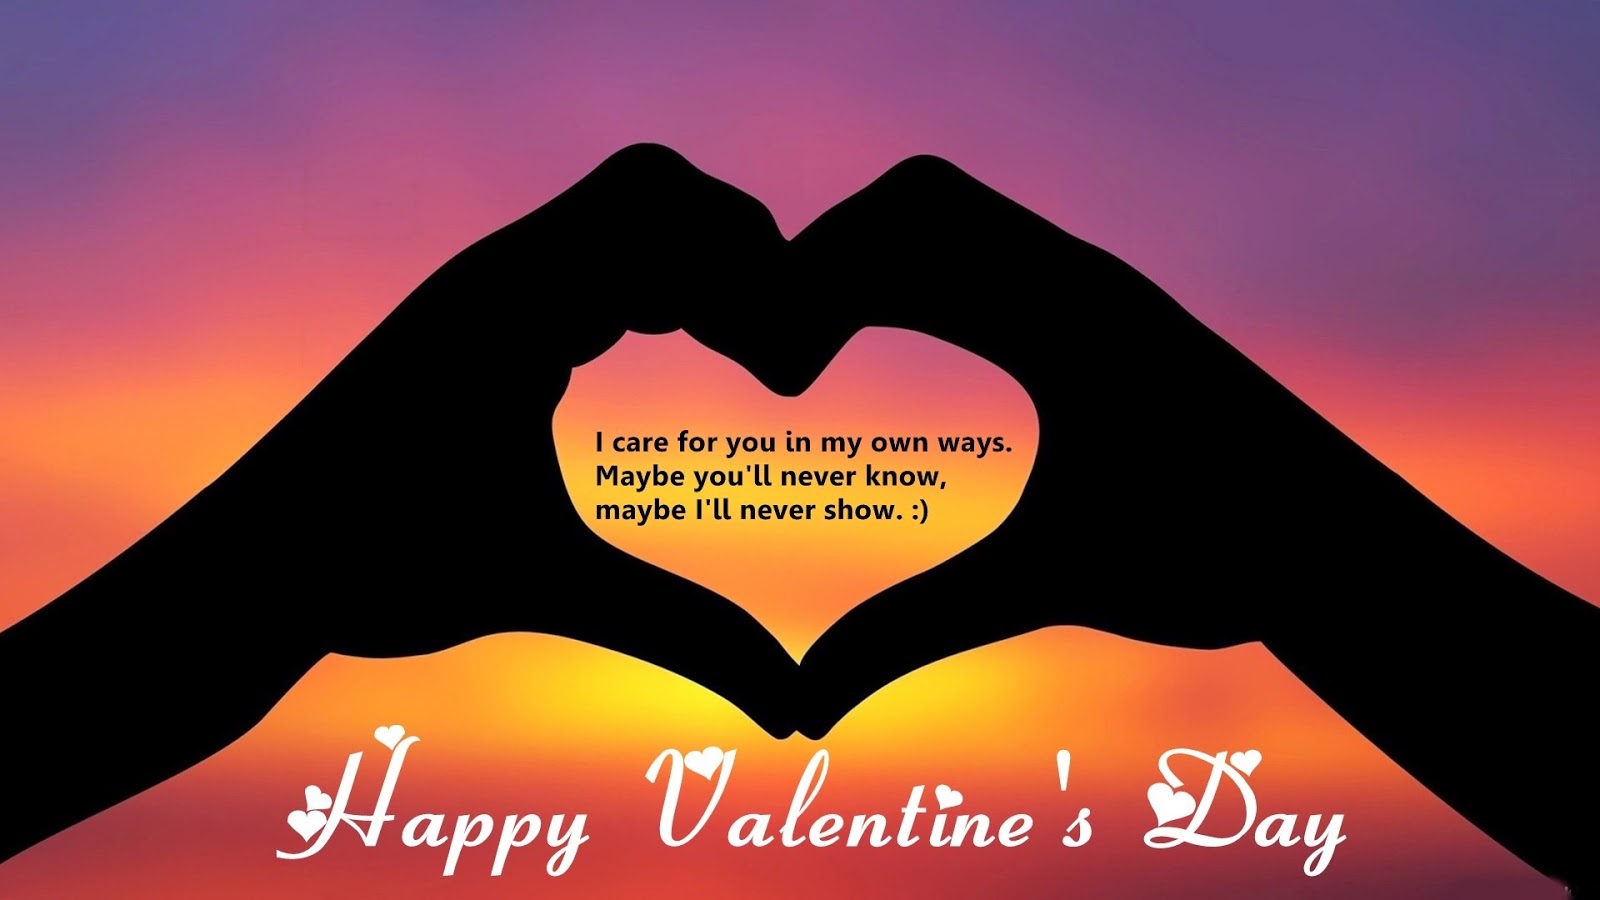 ANIMATED EXPRESSION OF LOVE ANIMATED EXPRESSION OF LOVE HAPPY VALENTINE S DAY